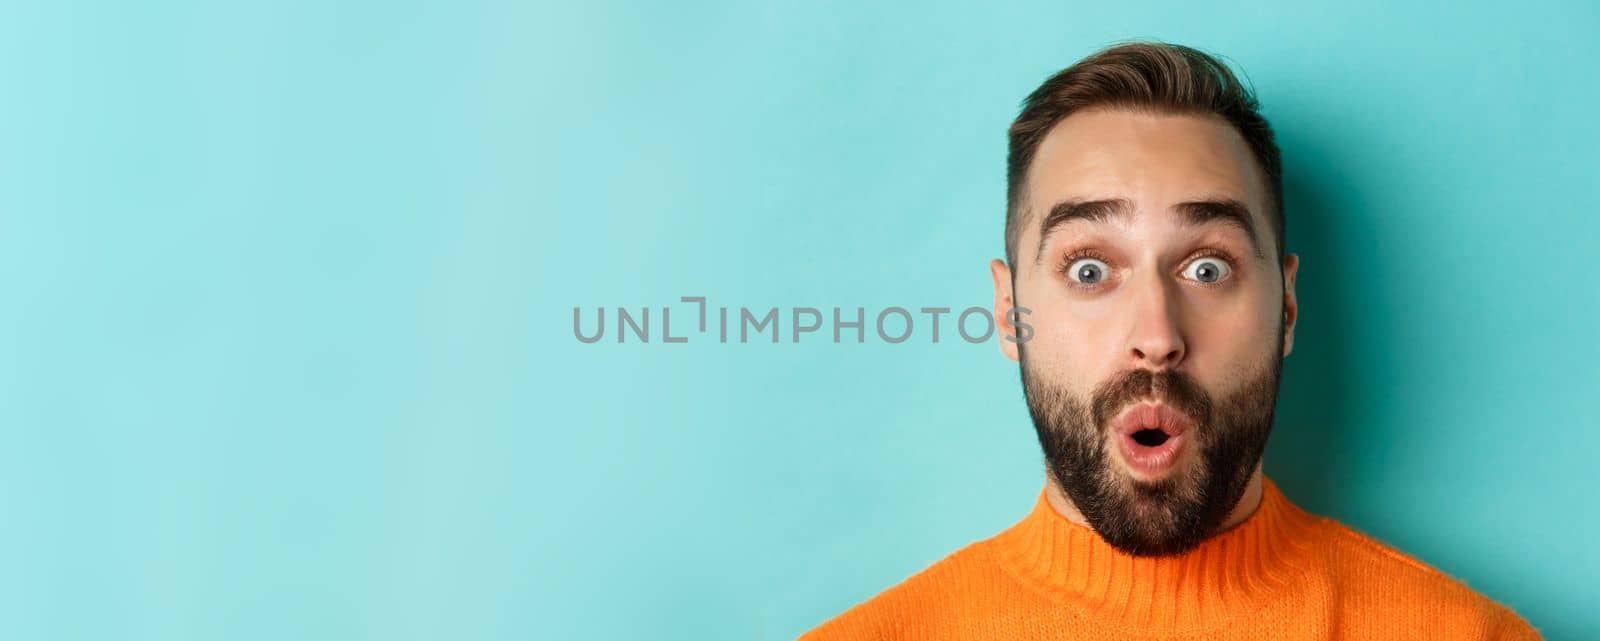 Headshot of handsome caucasian man with beard standing in orange sweater against turquoise background, saying wow and staring surprised at camera.